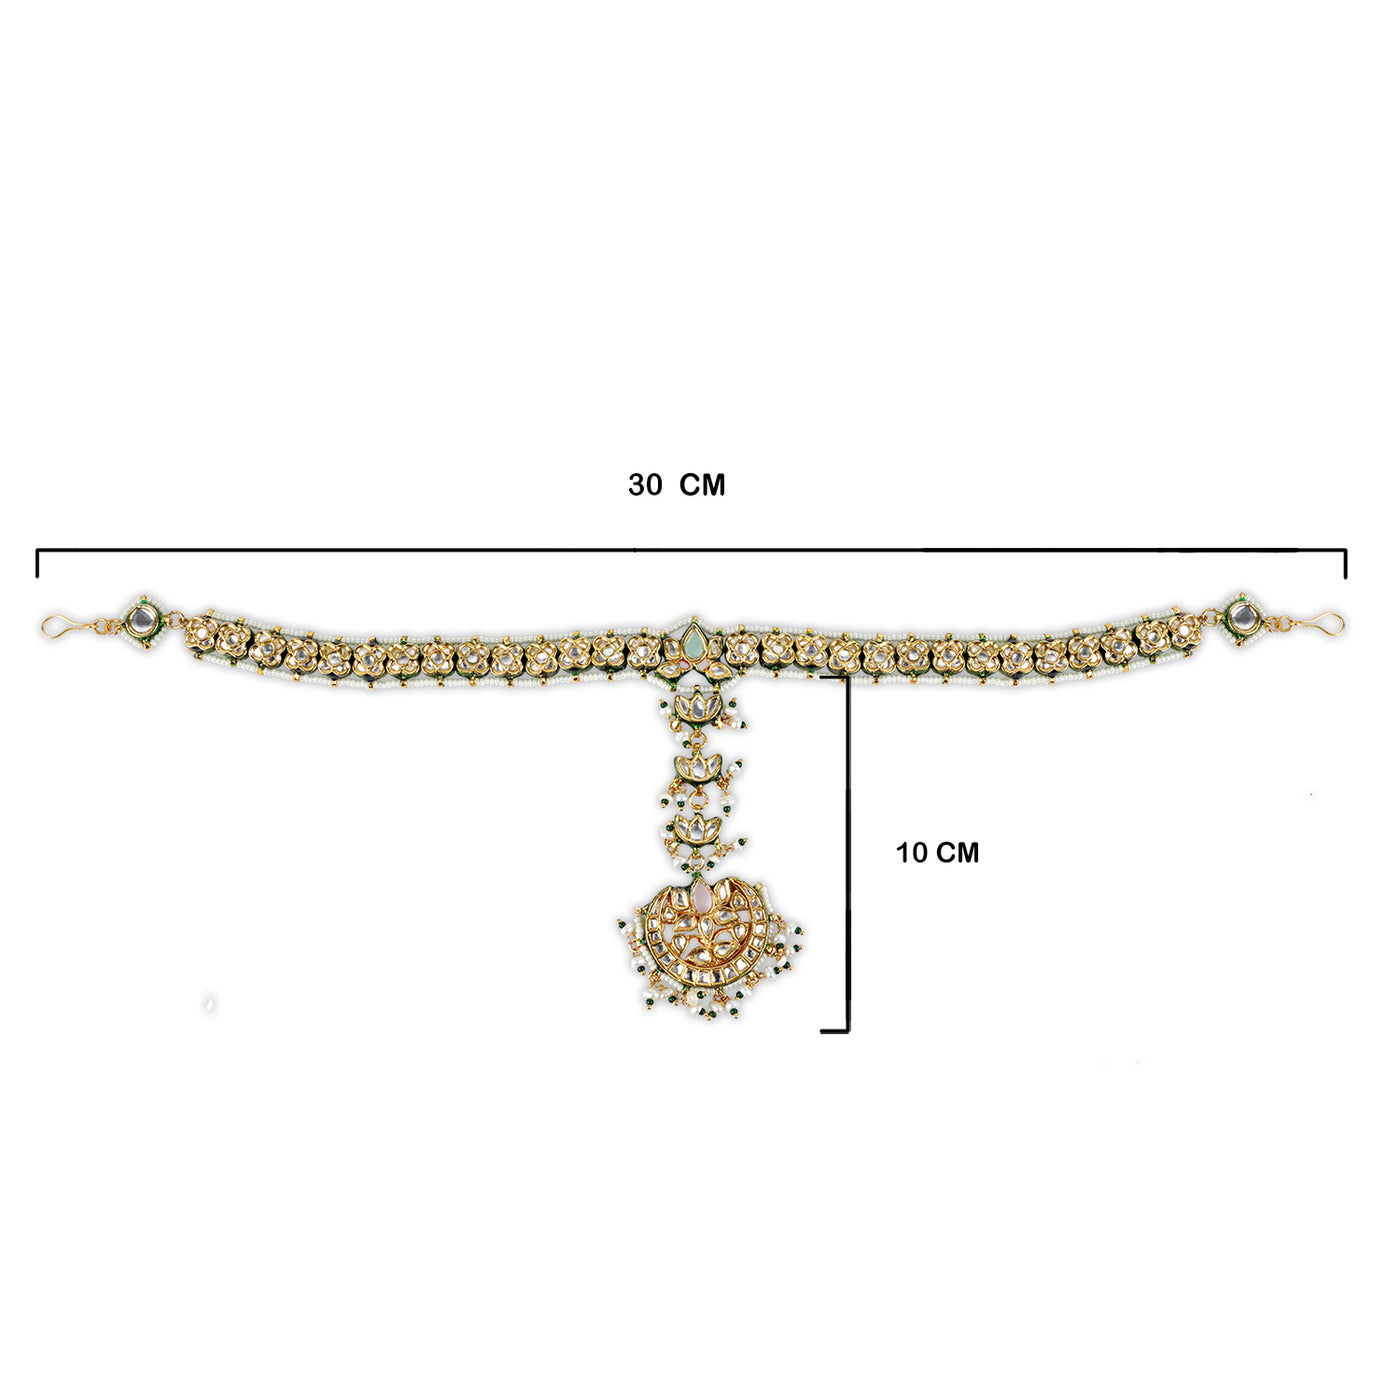 White Bead Kundan Maathapatti with measurements in cm. 30cm in length and 10cm in height.